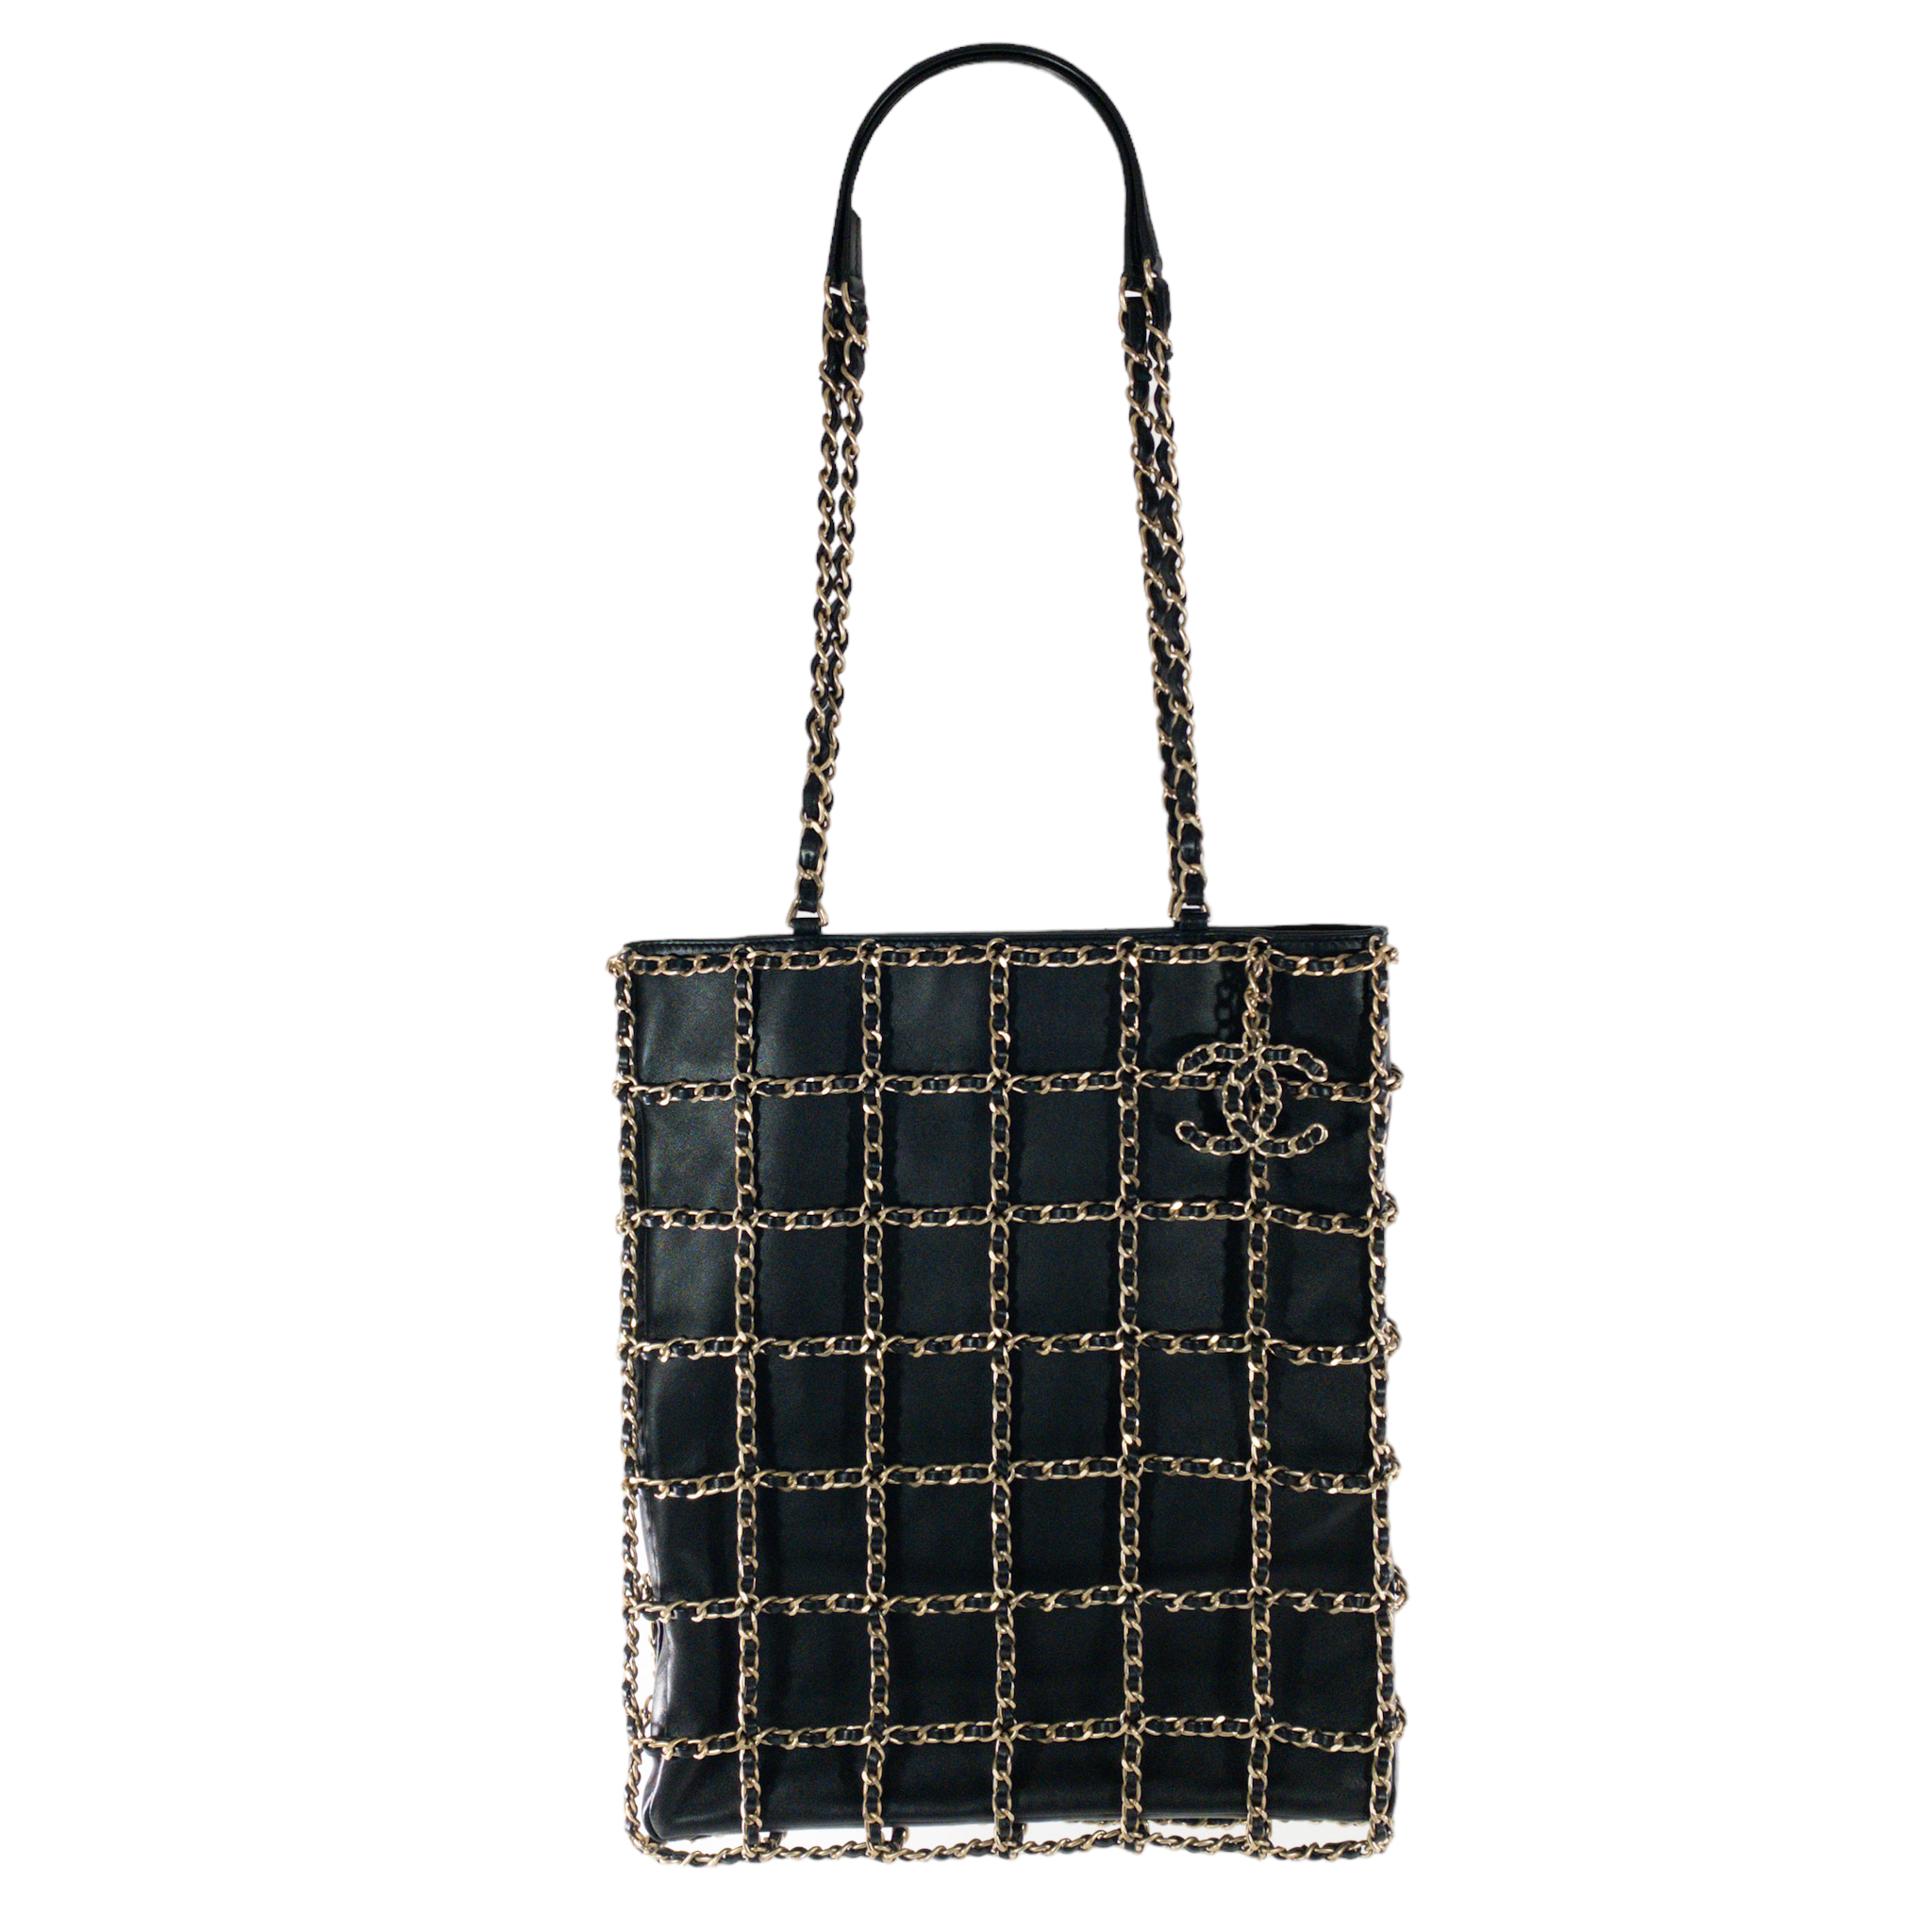 Chanel Woven Chain Frame Shopping Tote